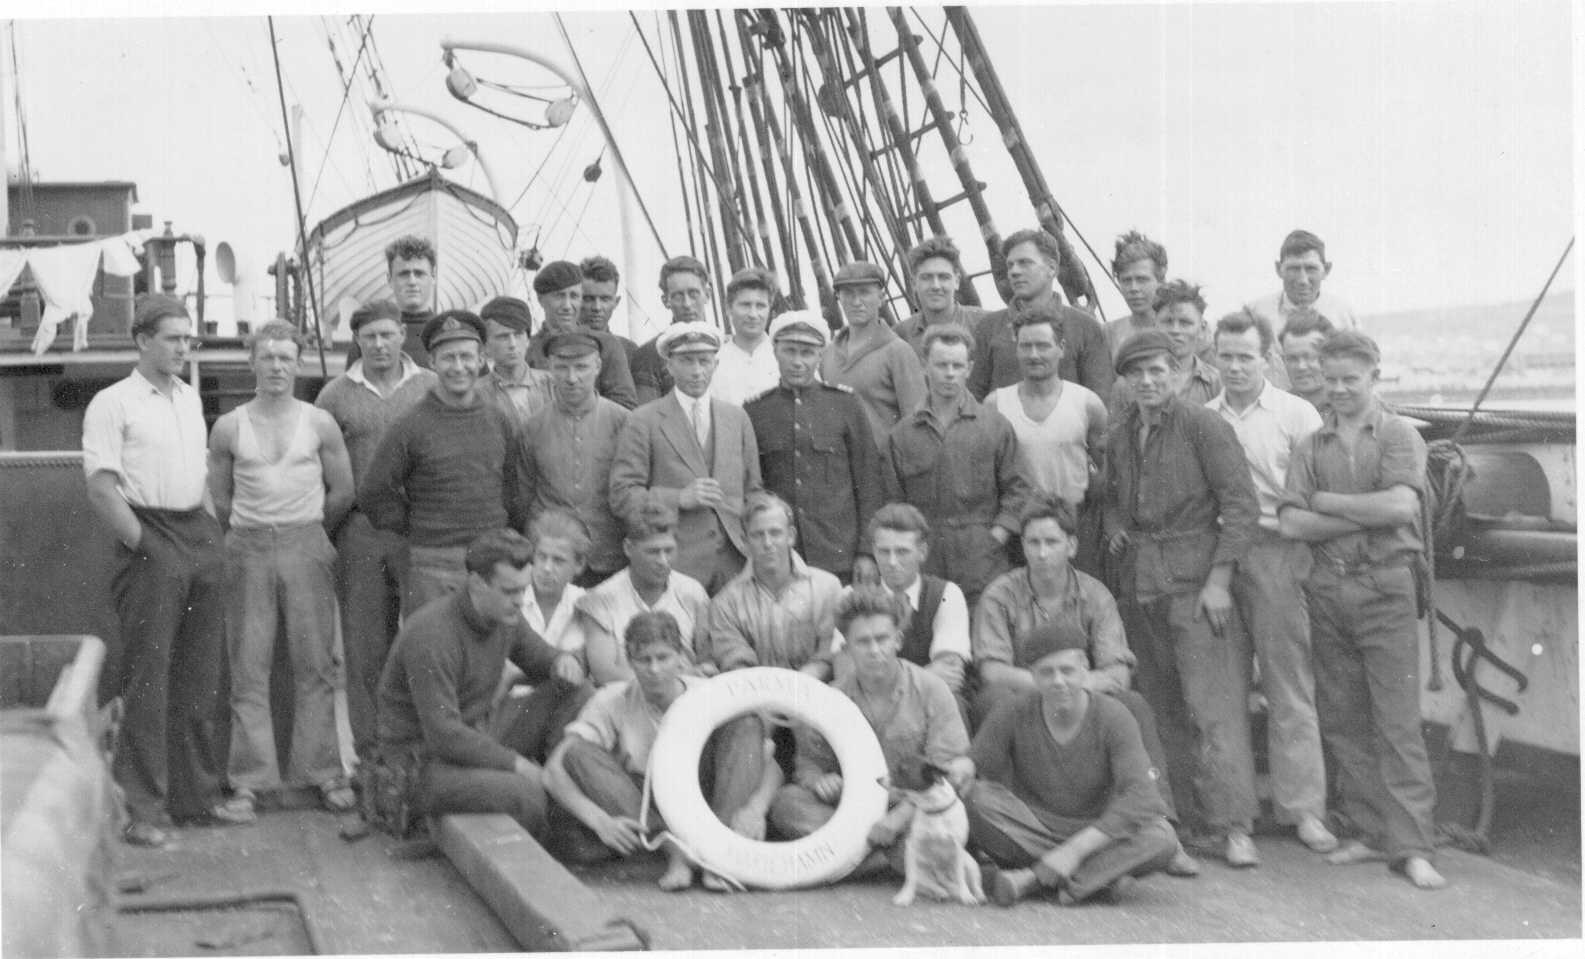 The crew of the Parma at Port Lincoln in March 1935.